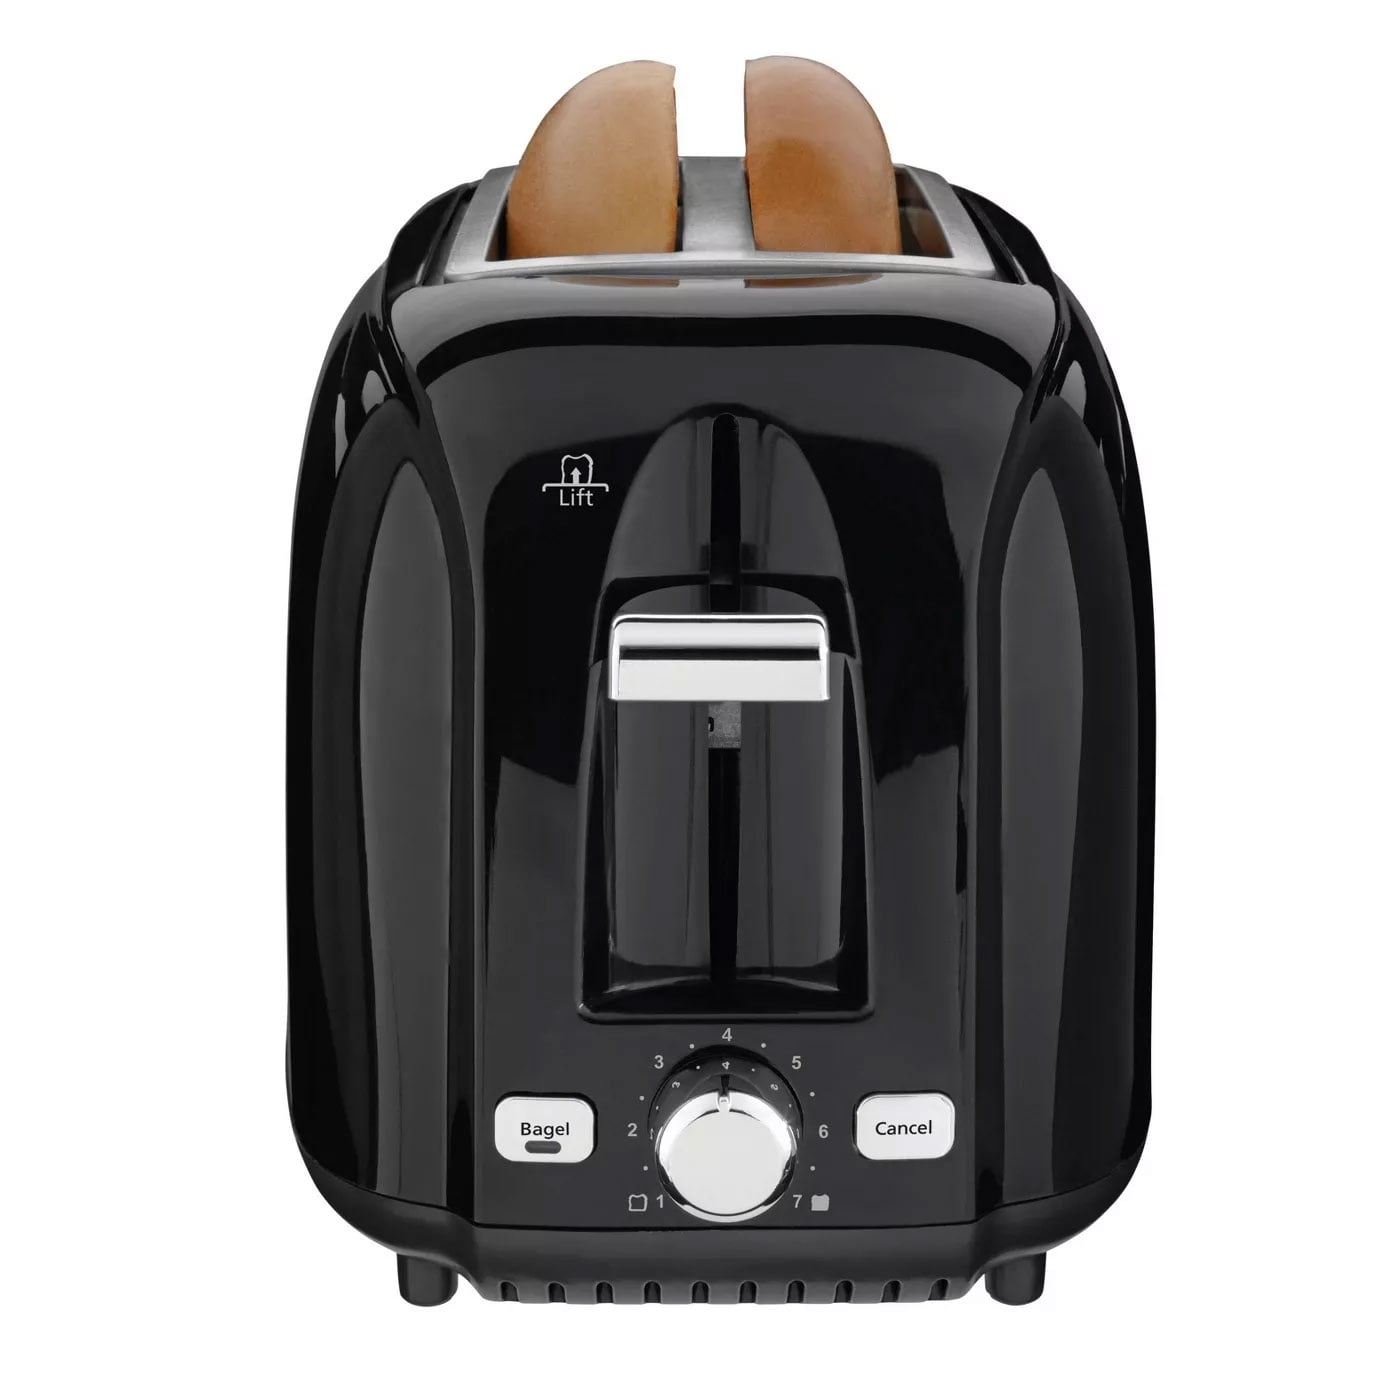 New-IOrB/P-OP Details about   Sunbeam 2-Slice Toaster 